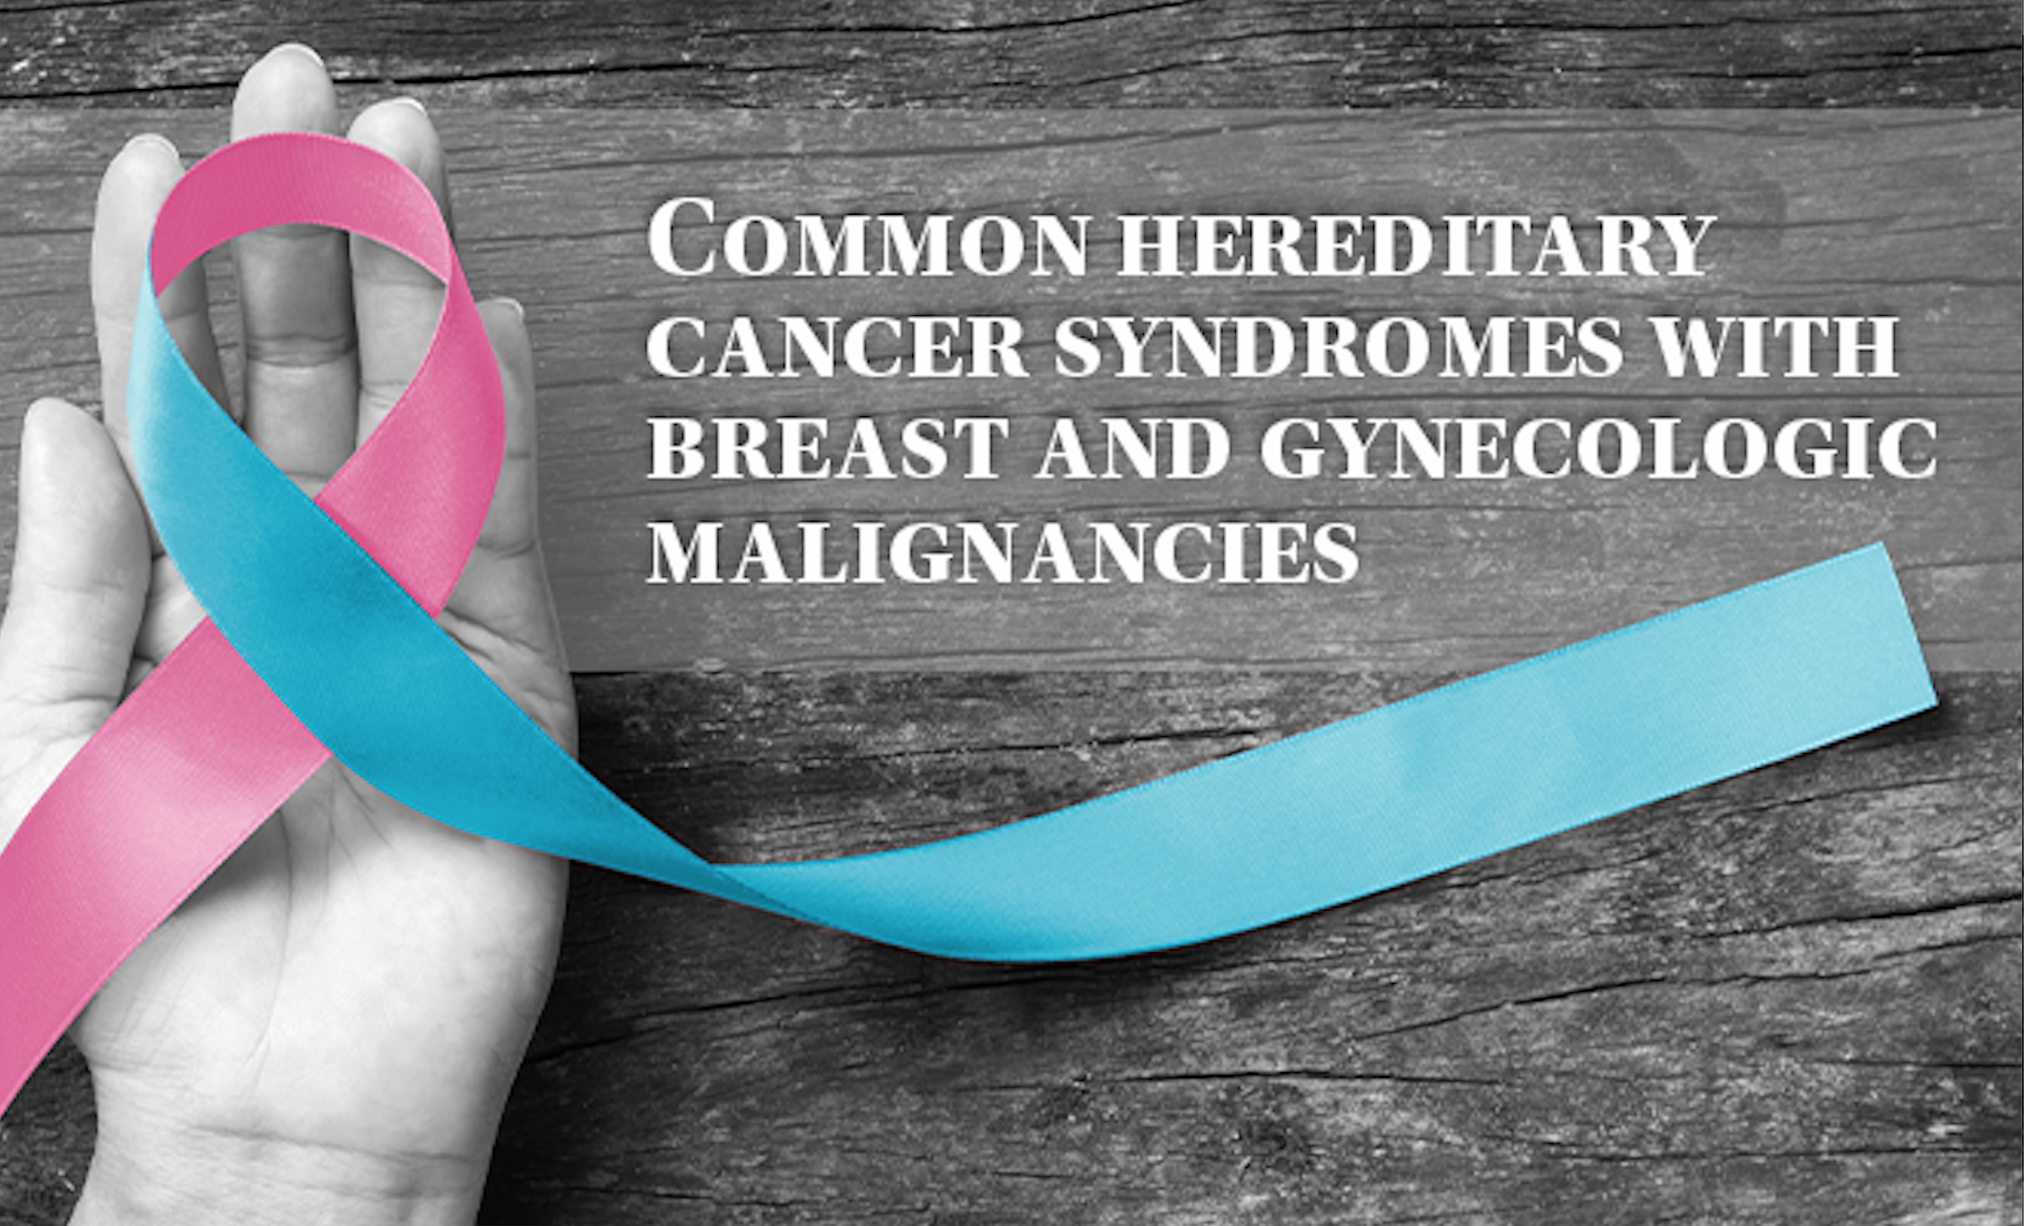 Common hereditary cancer syndromes with breast and gynecologic malignancies